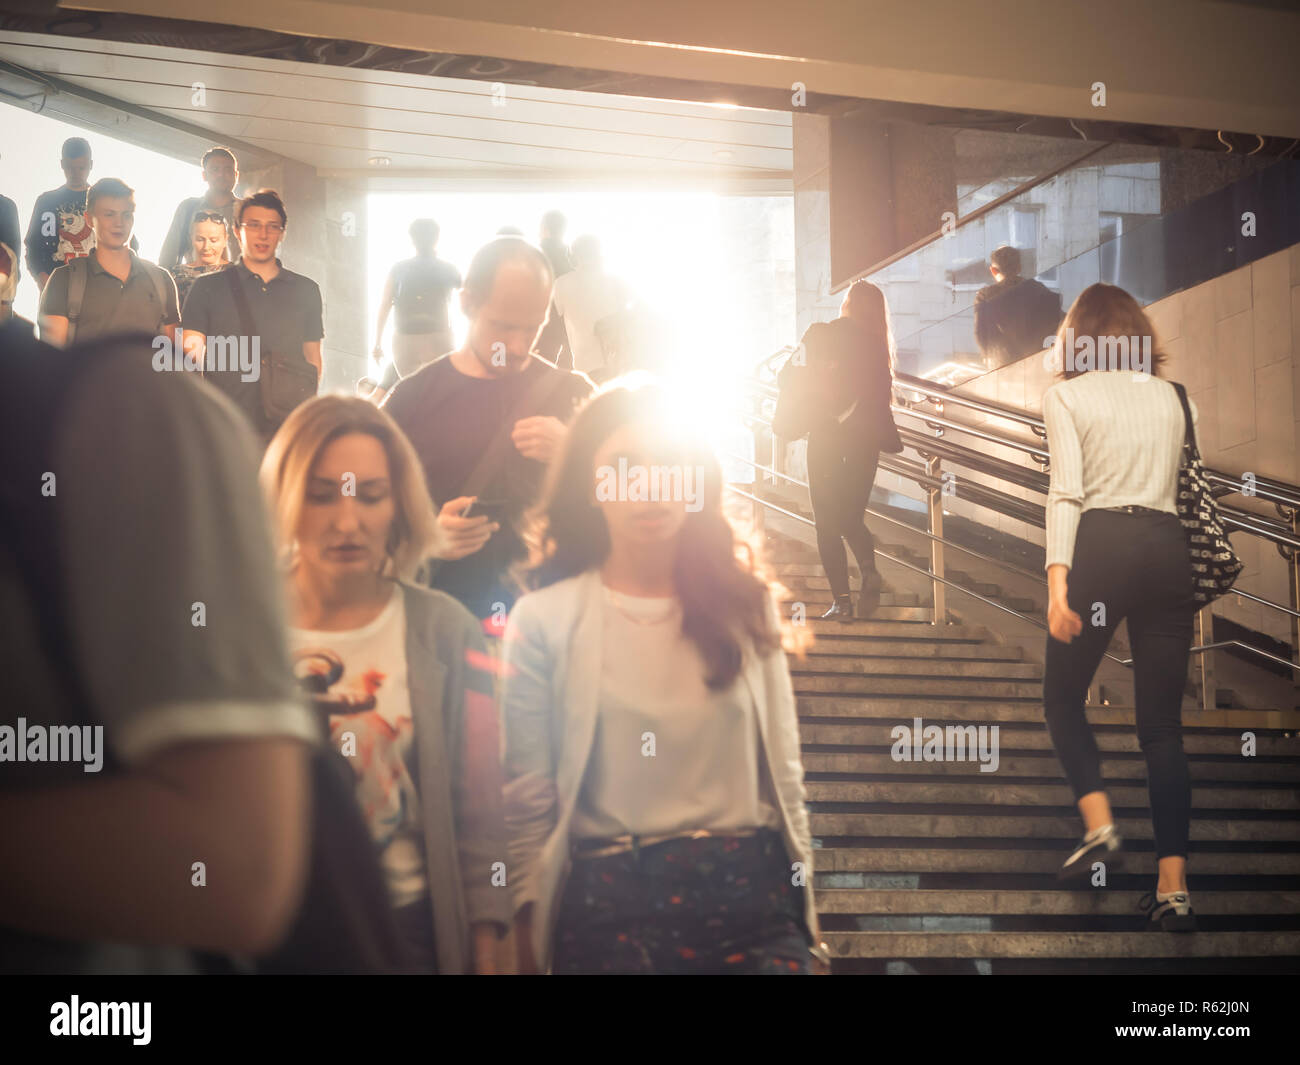 Moscow, Russia - September 6, 2018: Ordinary people go up and go down to the underground subway at rush hour. People go down to the underpass. Silhouettes of people walking down the steps against the backdrop of the sun. Stock Photo